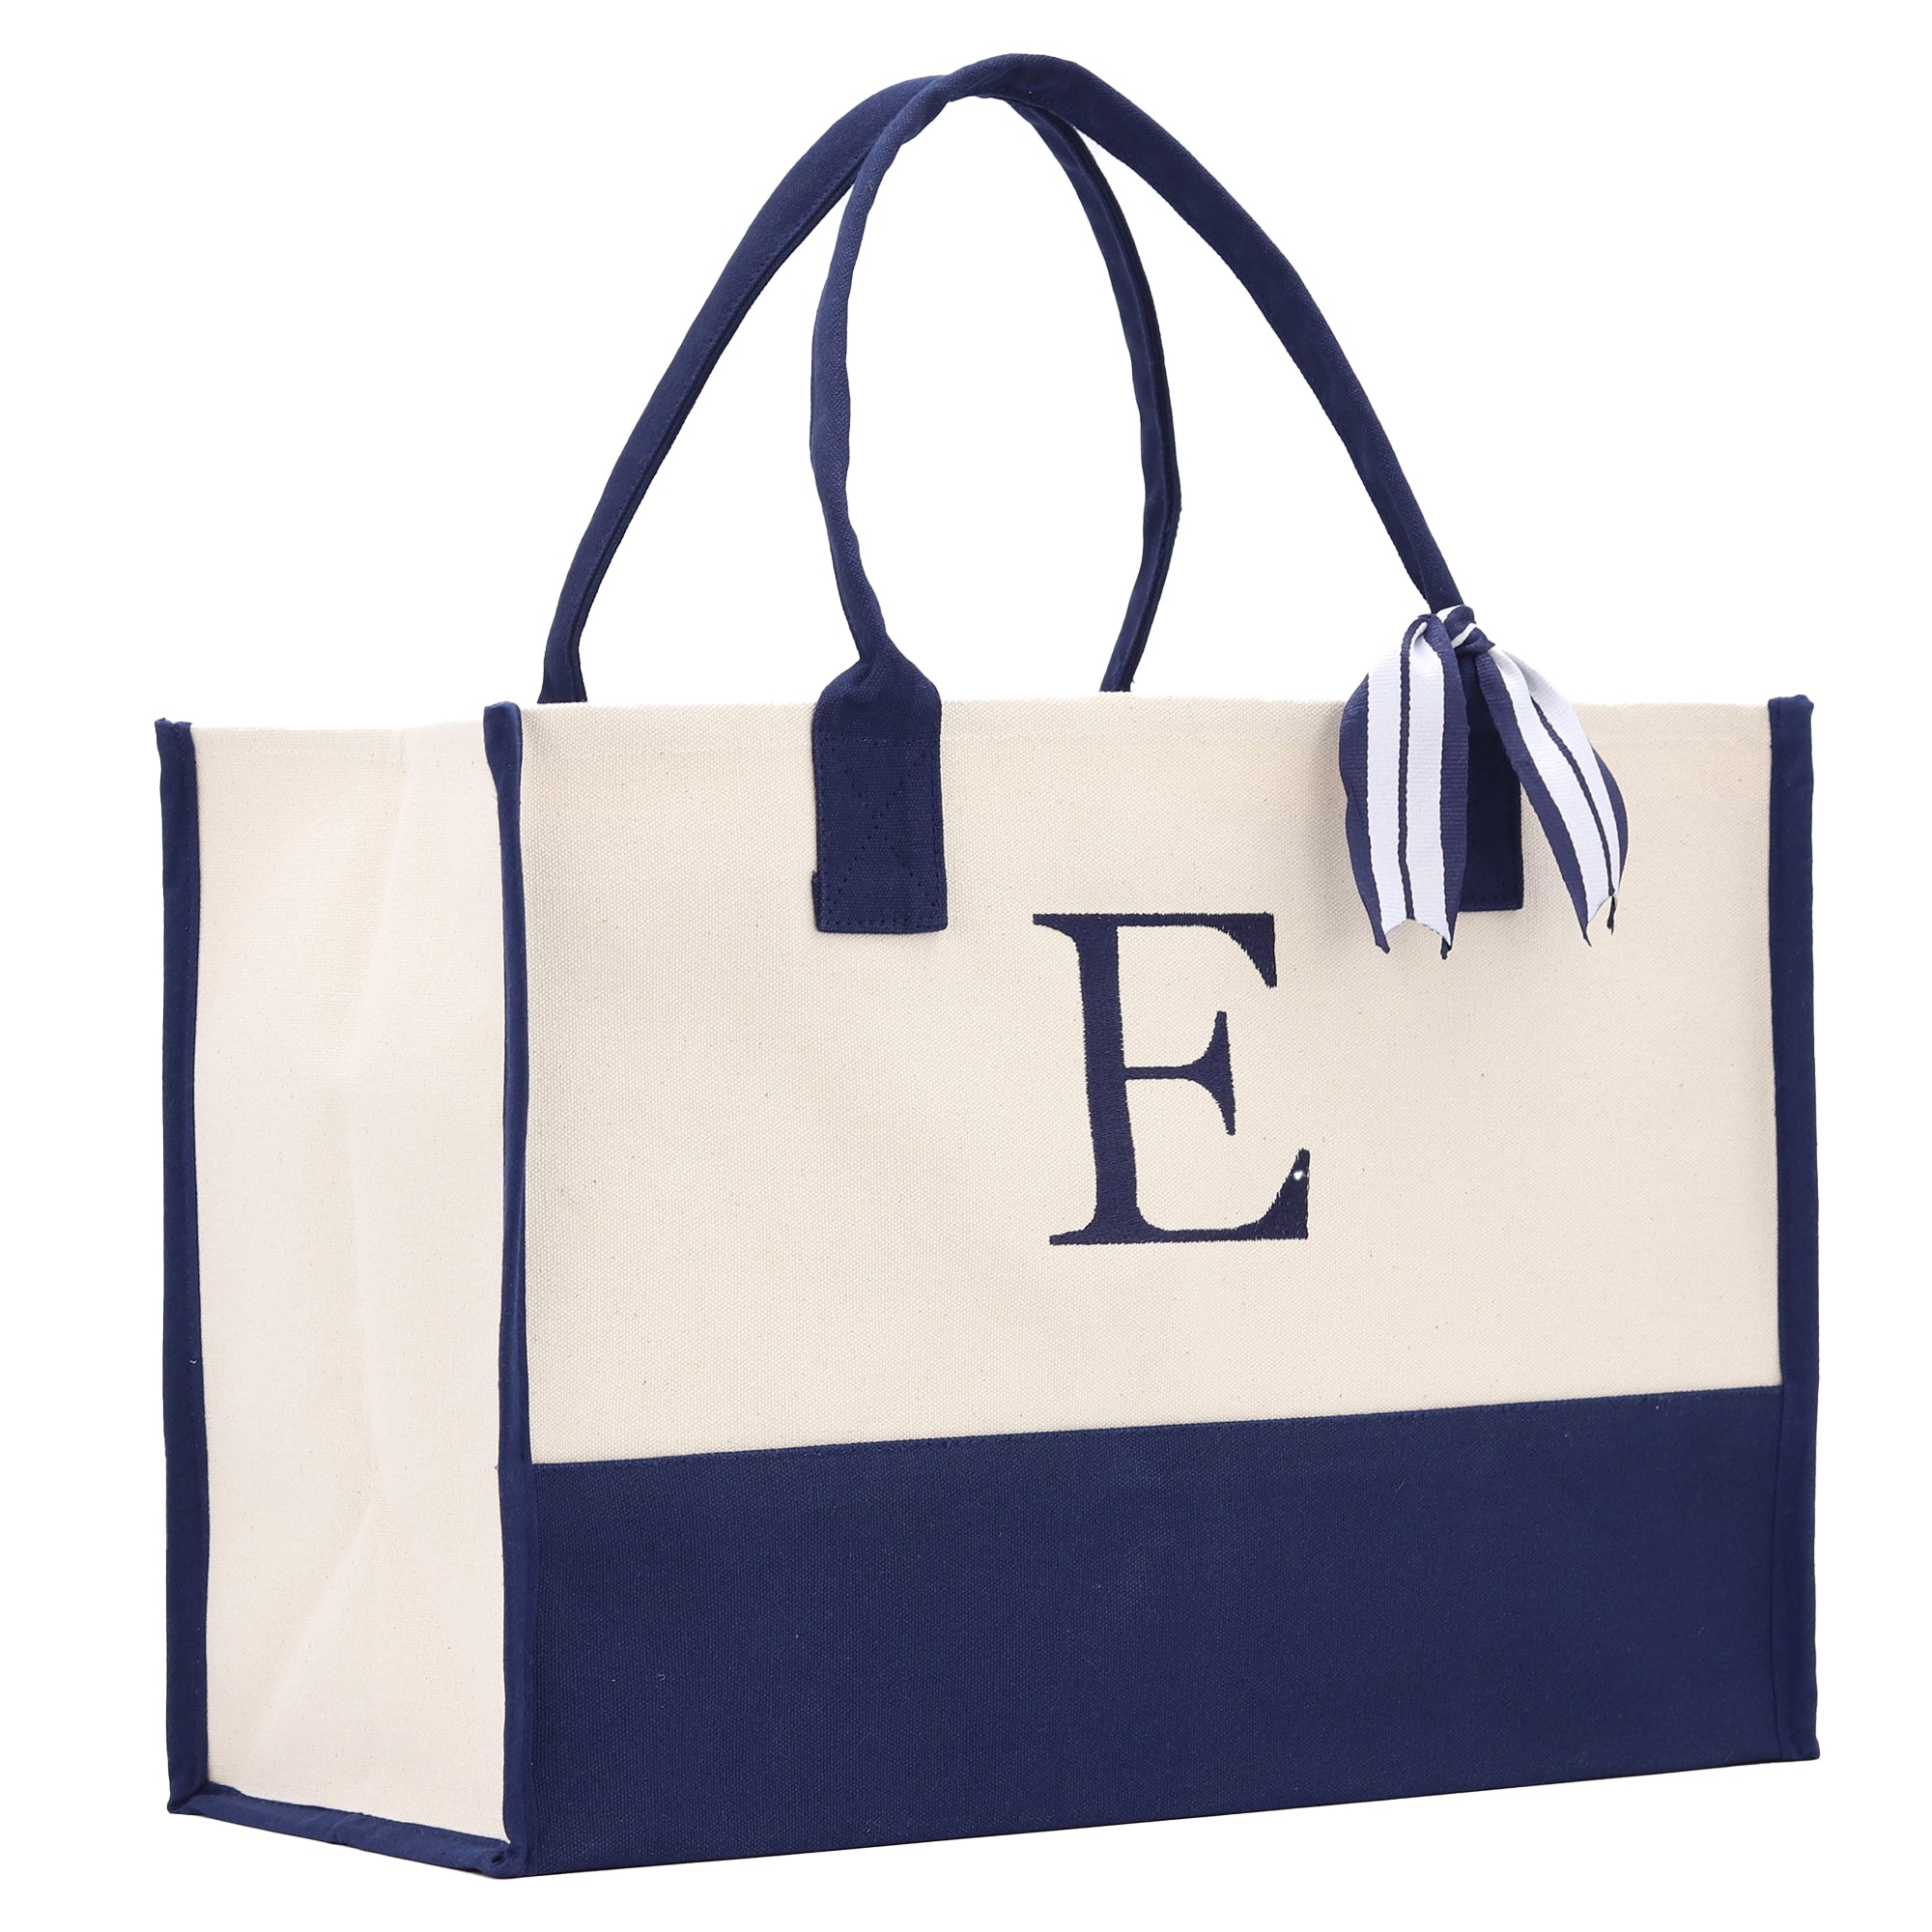 Monogram Tote Bag with 100% Cotton Canvas and a Chic Personalized Monogram Navy Blue Vanessa Rosella Block E 